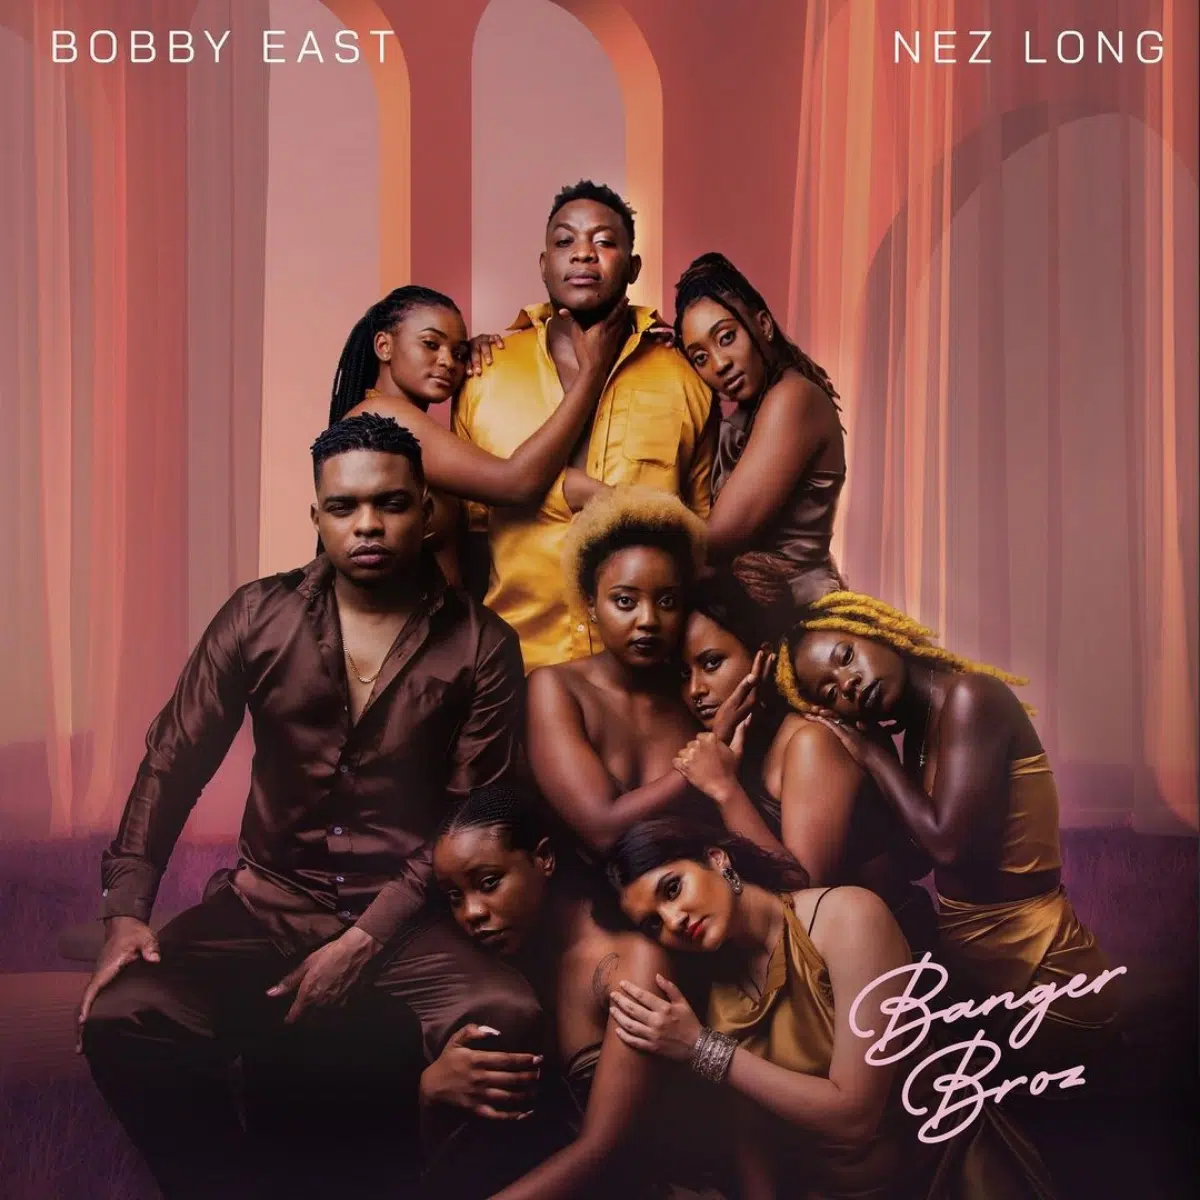 DOWNLOAD: Bobby East & Nez Long – “Why” Mp3